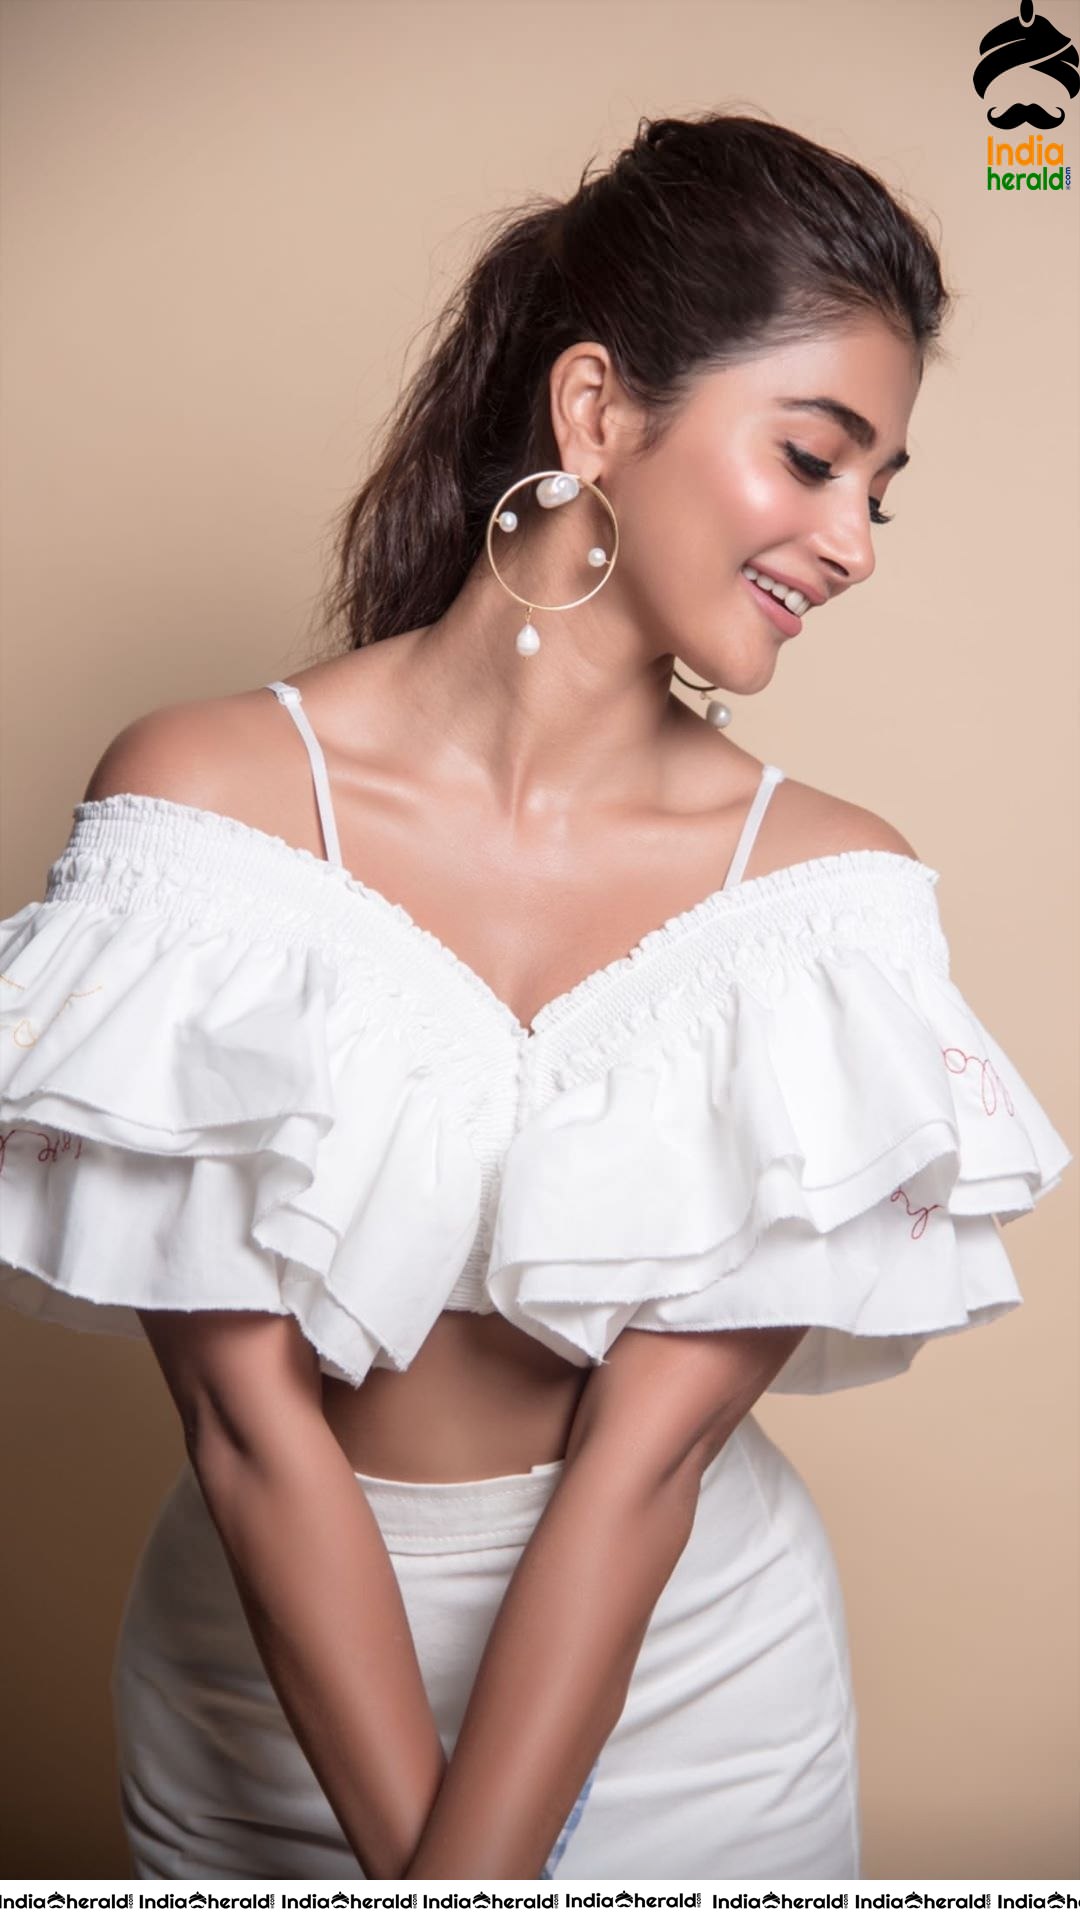 Pooja Hegde Shows her Hot Waist and Navel in these Latest Big Collection of Photos